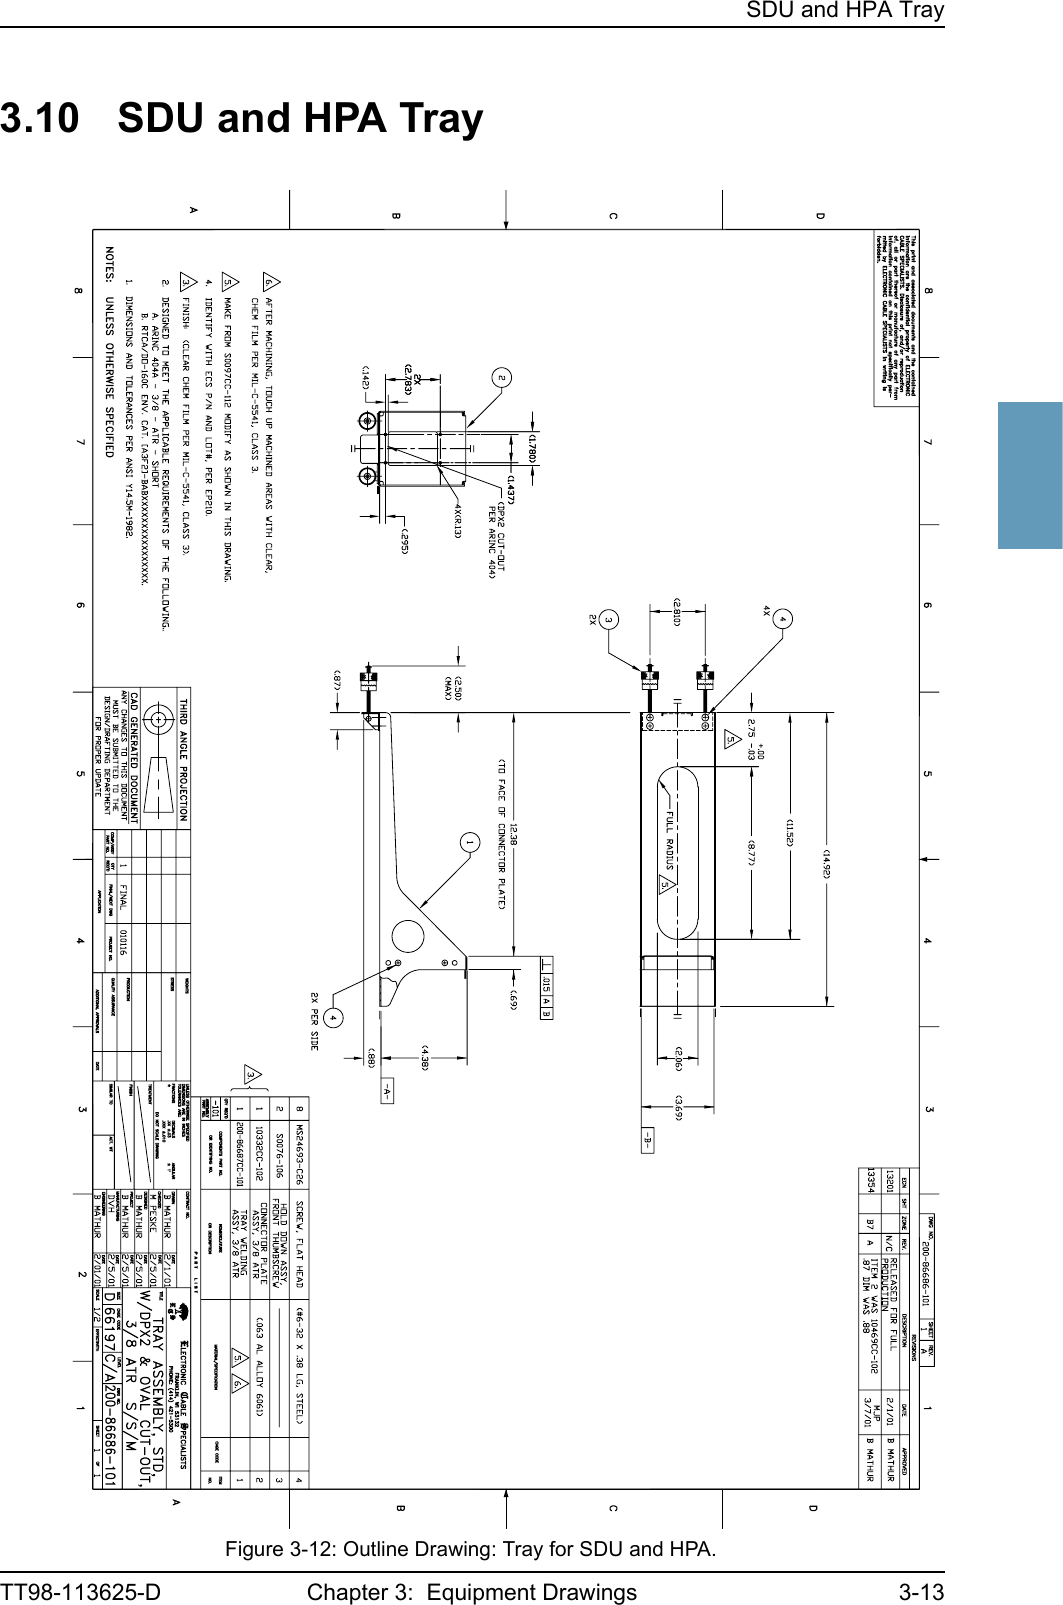 SDU and HPA TrayTT98-113625-D Chapter 3:  Equipment Drawings 3-1333333.10 SDU and HPA TrayFigure 3-12: Outline Drawing: Tray for SDU and HPA.